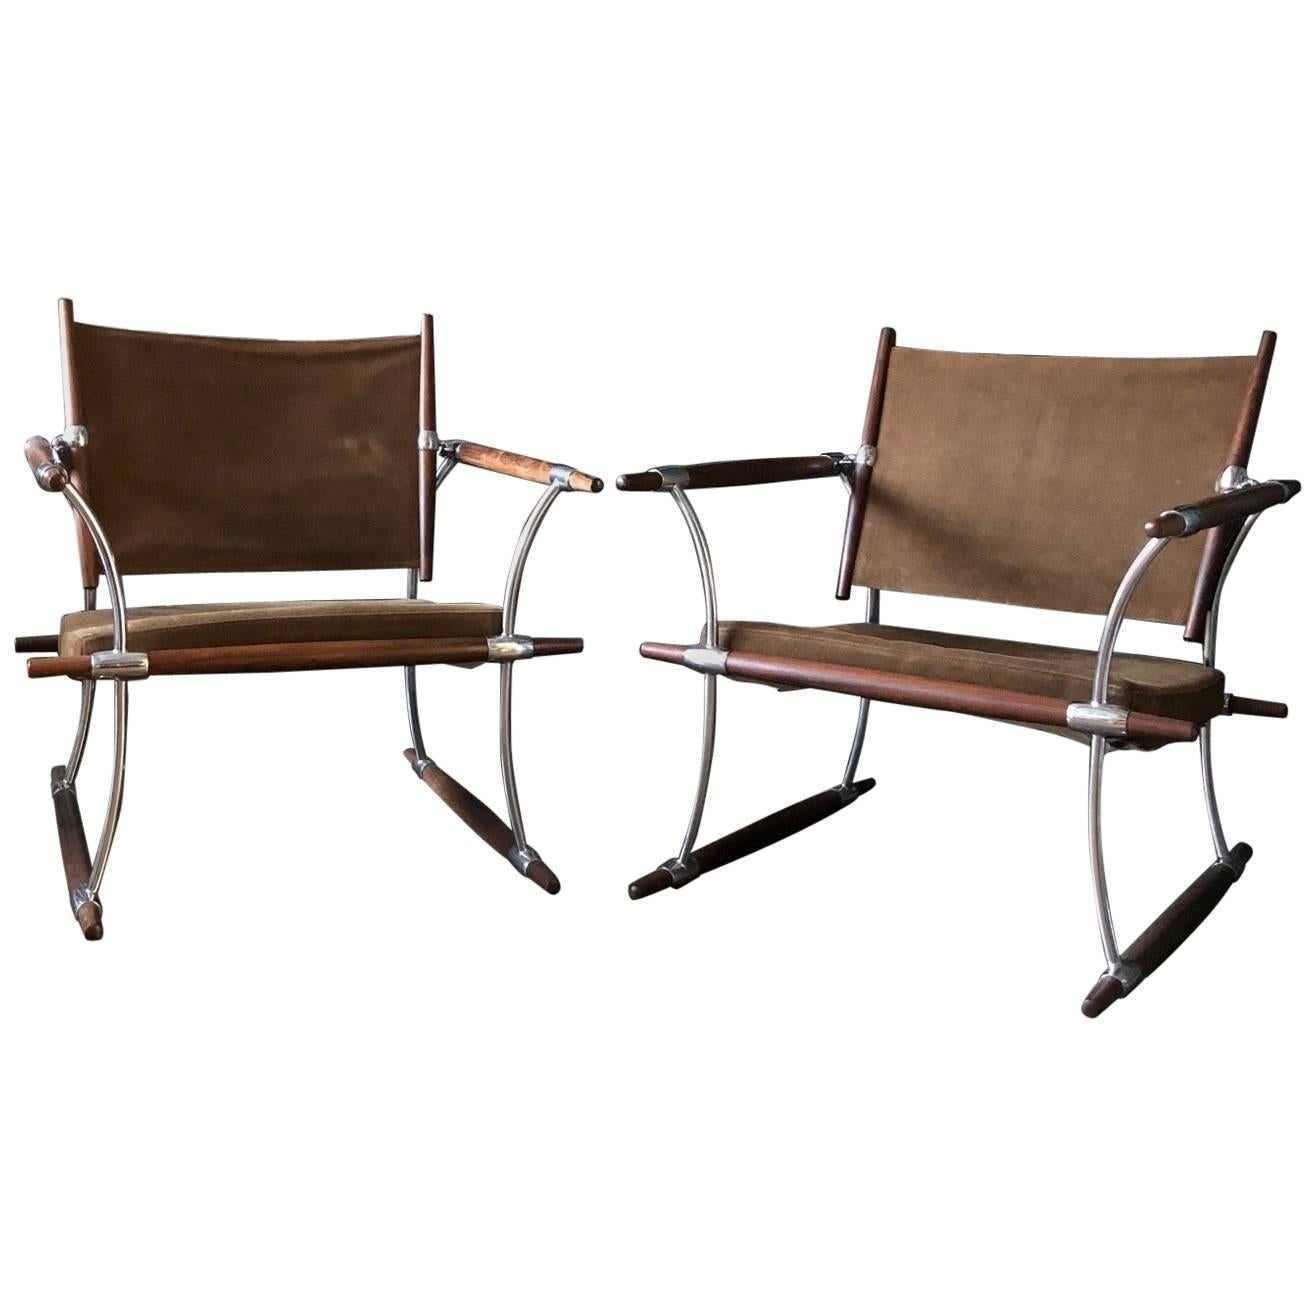 Pair of "Stokke" Chairs by Jens Quistgaard for Nissen For Sale